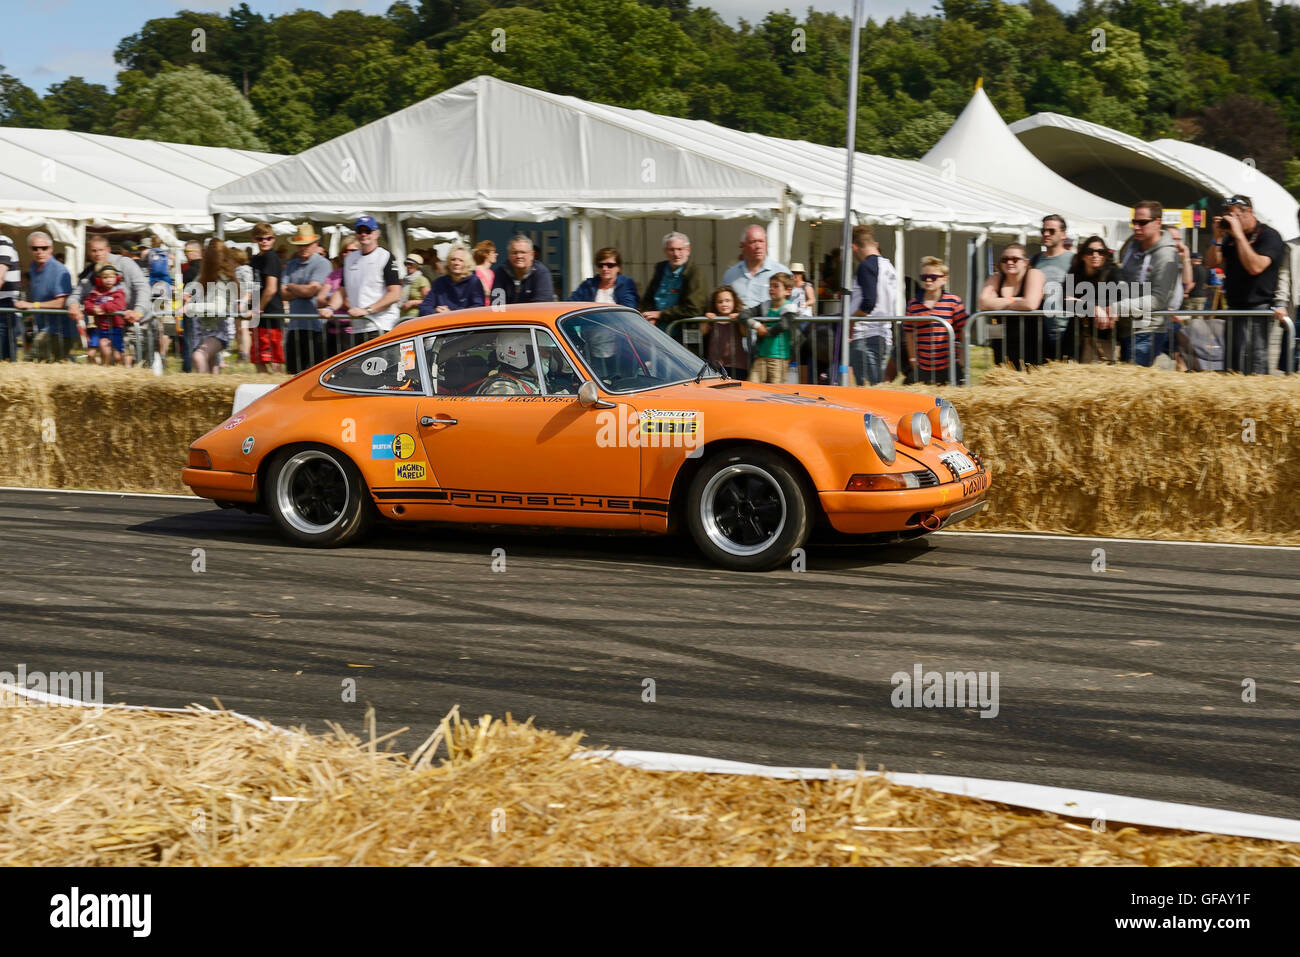 Carfest North, Bolesworth, Cheshire, UK. 30th July 2016. A classic Porsche on the track. The event is the brainchild of Chris Evans and features 3 days of cars, music and entertainment with profits being donated to the charity Children in Need. Andrew Paterson/Alamy Live News Stock Photo